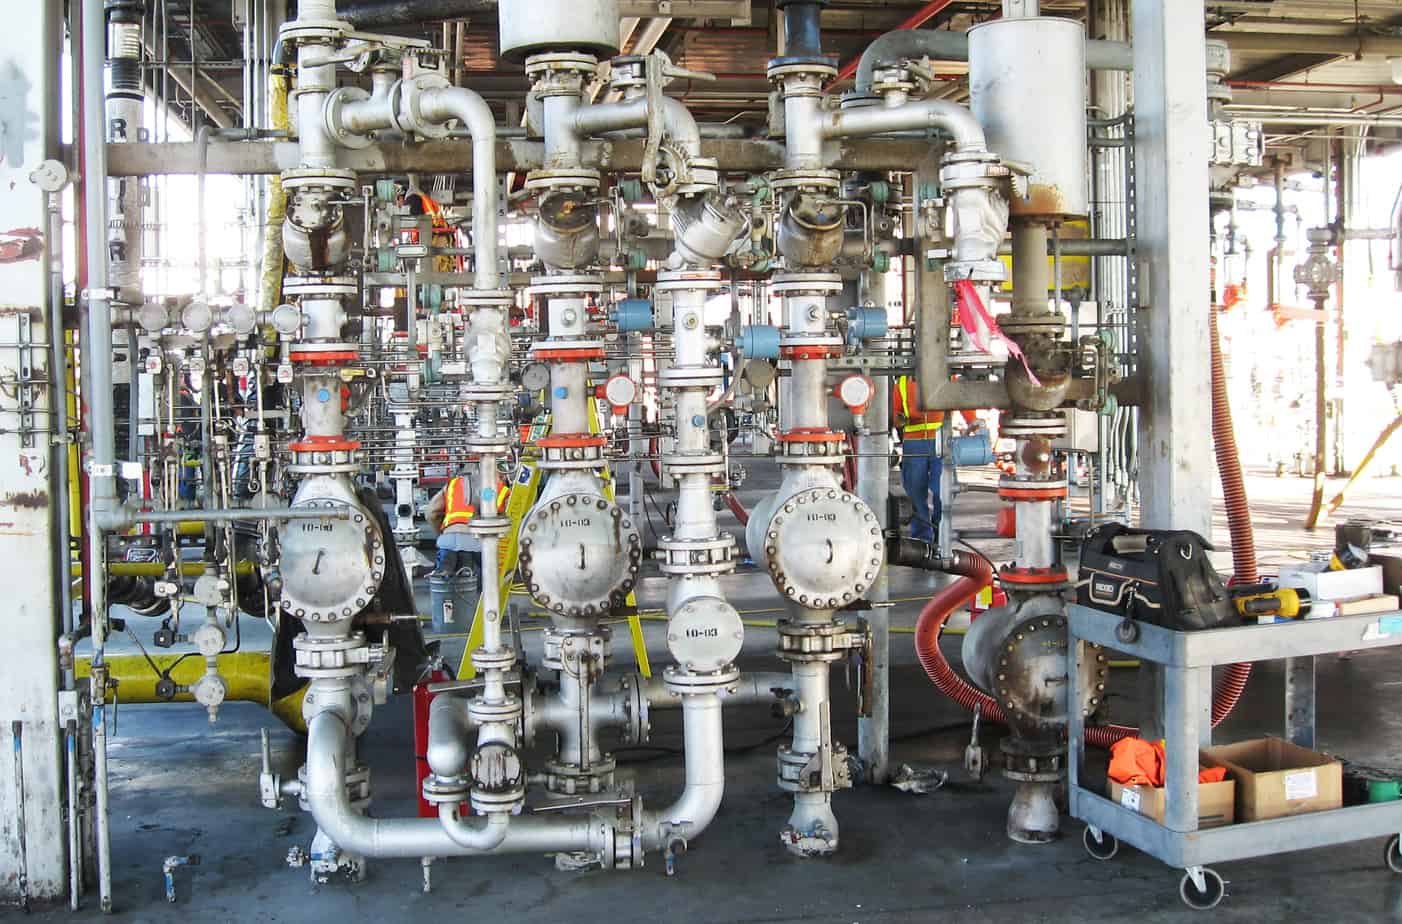 Shell refinery piping system instrumentation by Greenberry.